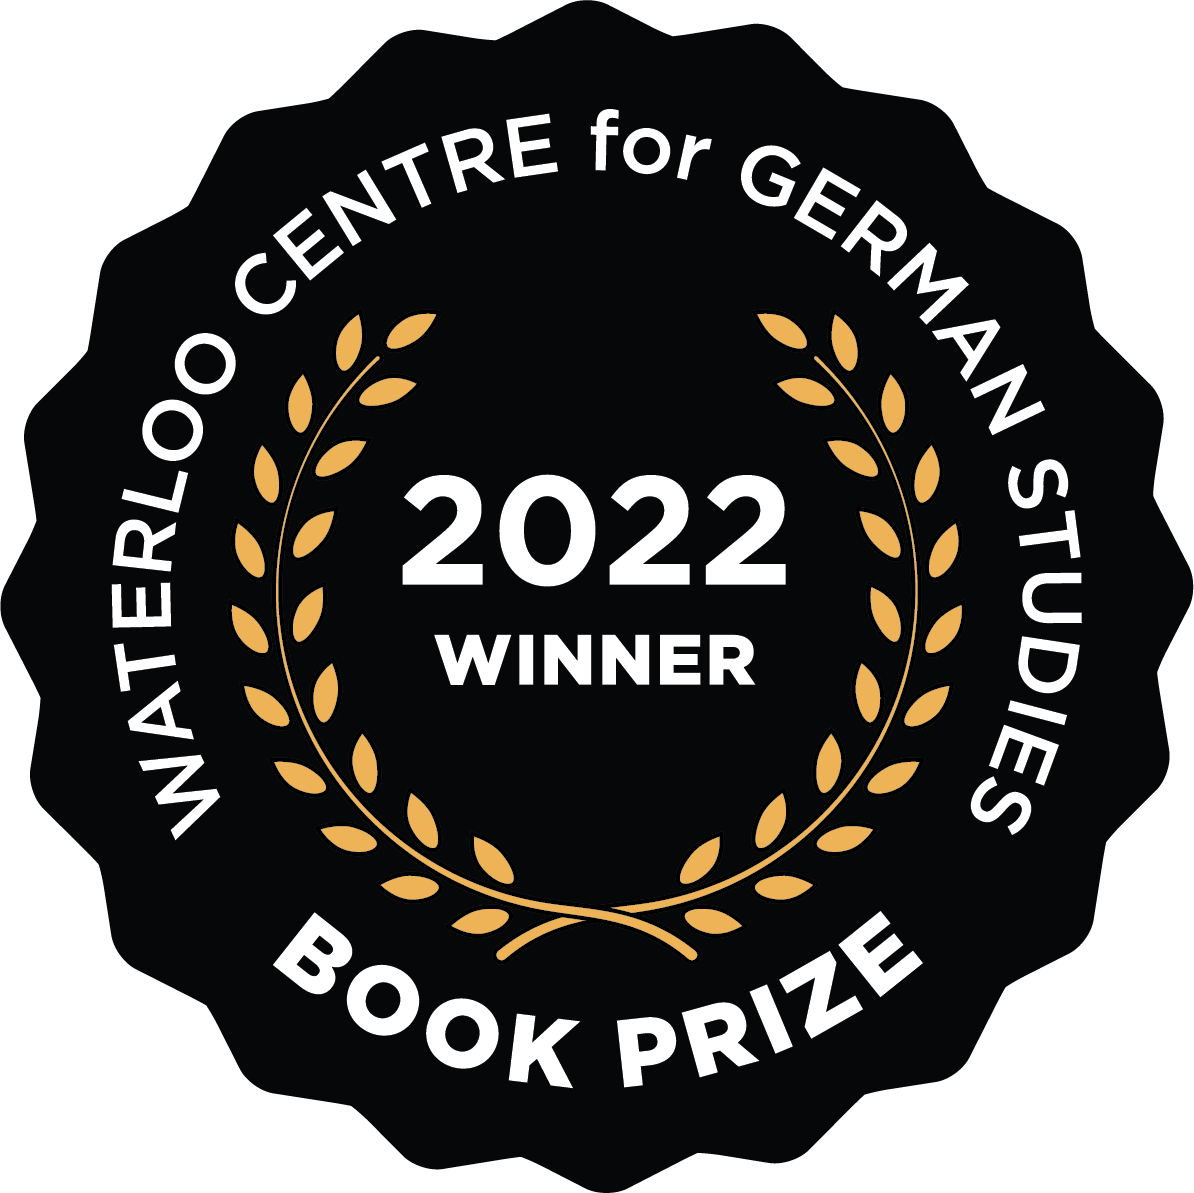 Golden leave surrounding the year 2022 as logo for the winner of the Book Prize